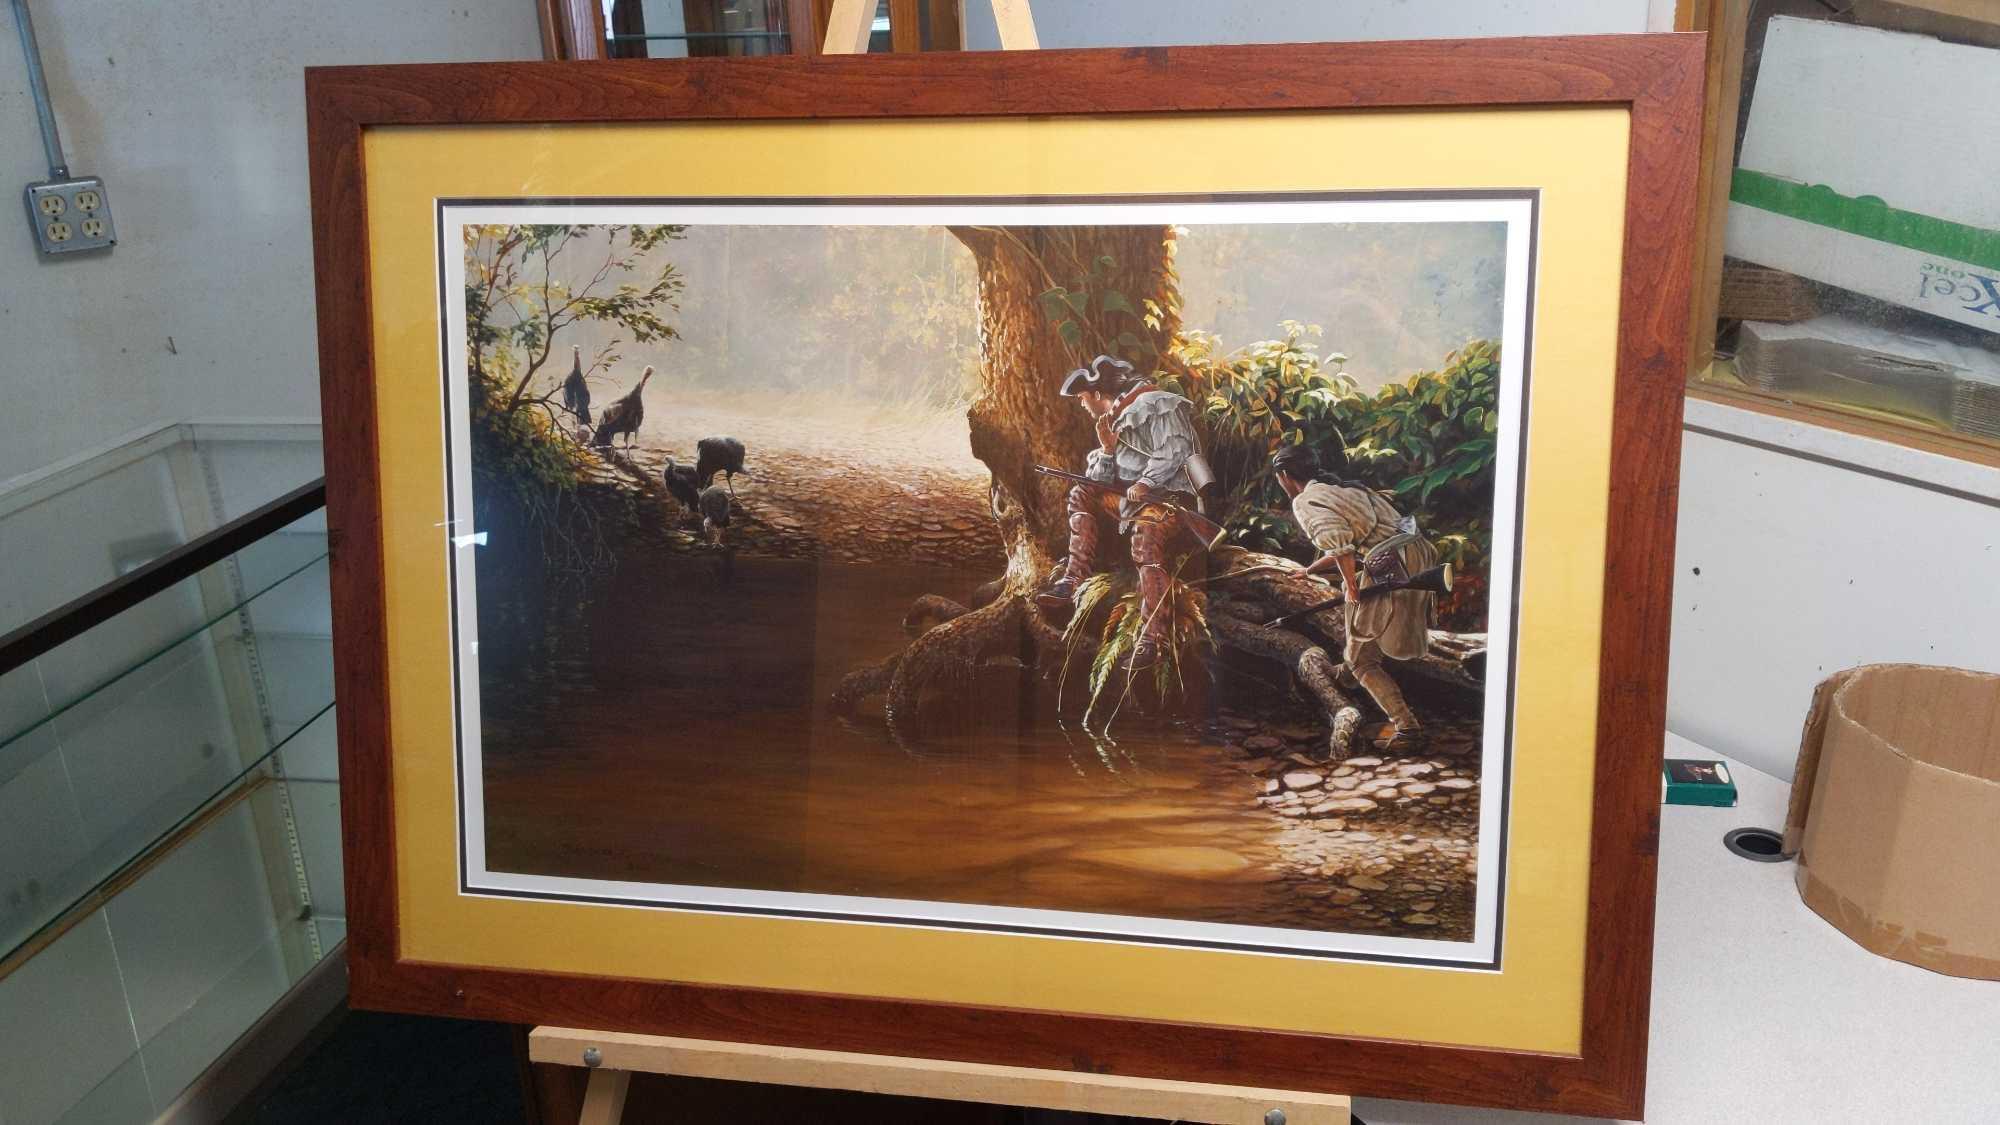 NWTF Christopher B. Walden 2000 - 4113/4800 Signed 38"x28"